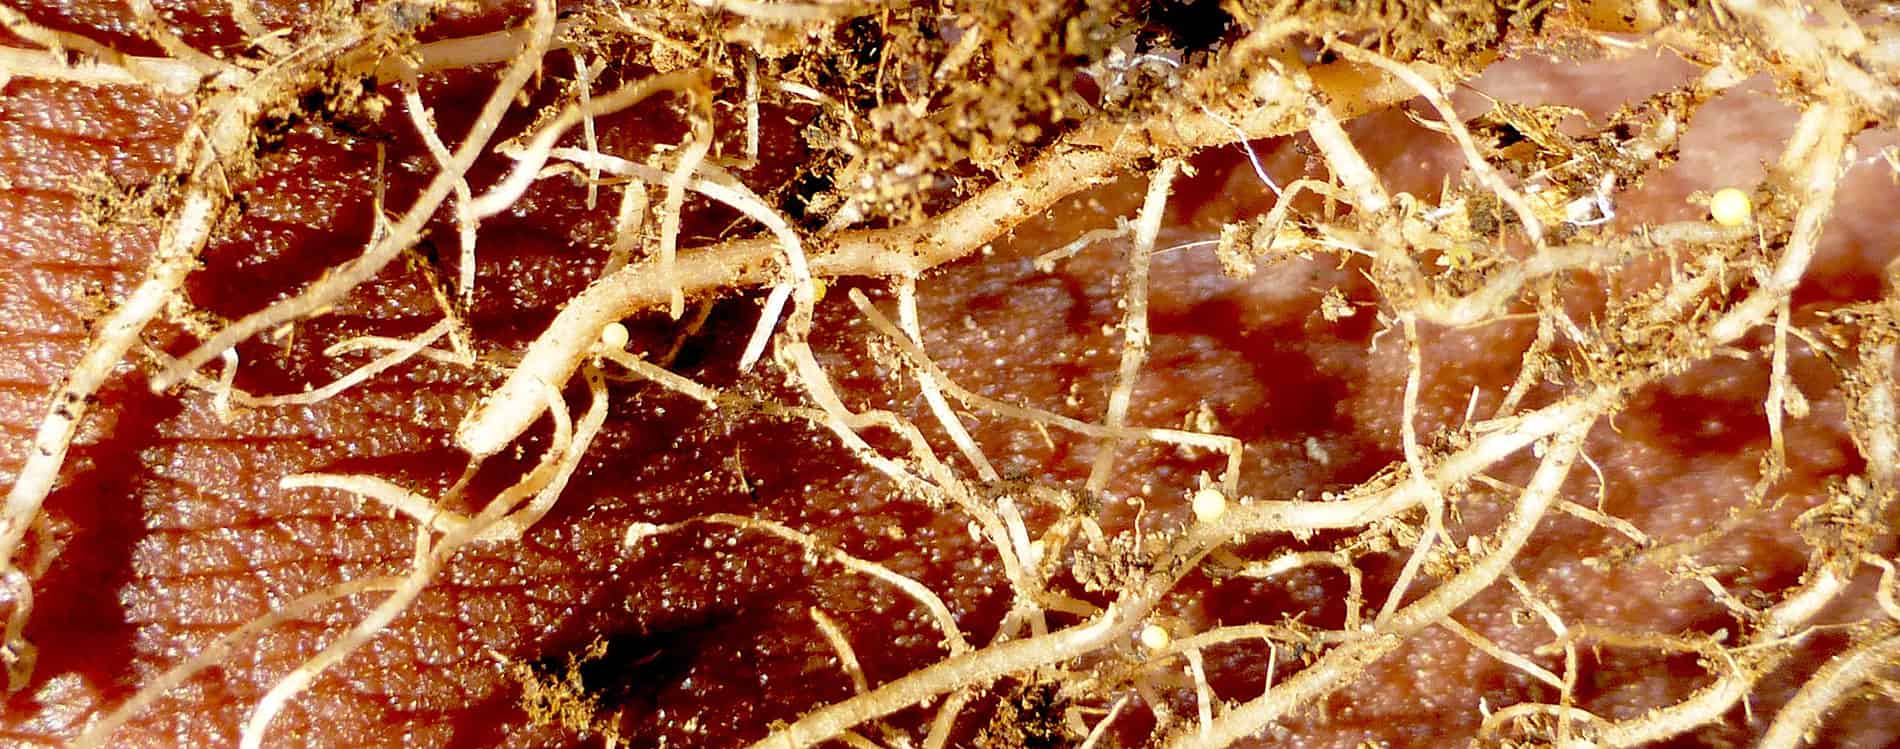 PCN cysts (white) on roots.